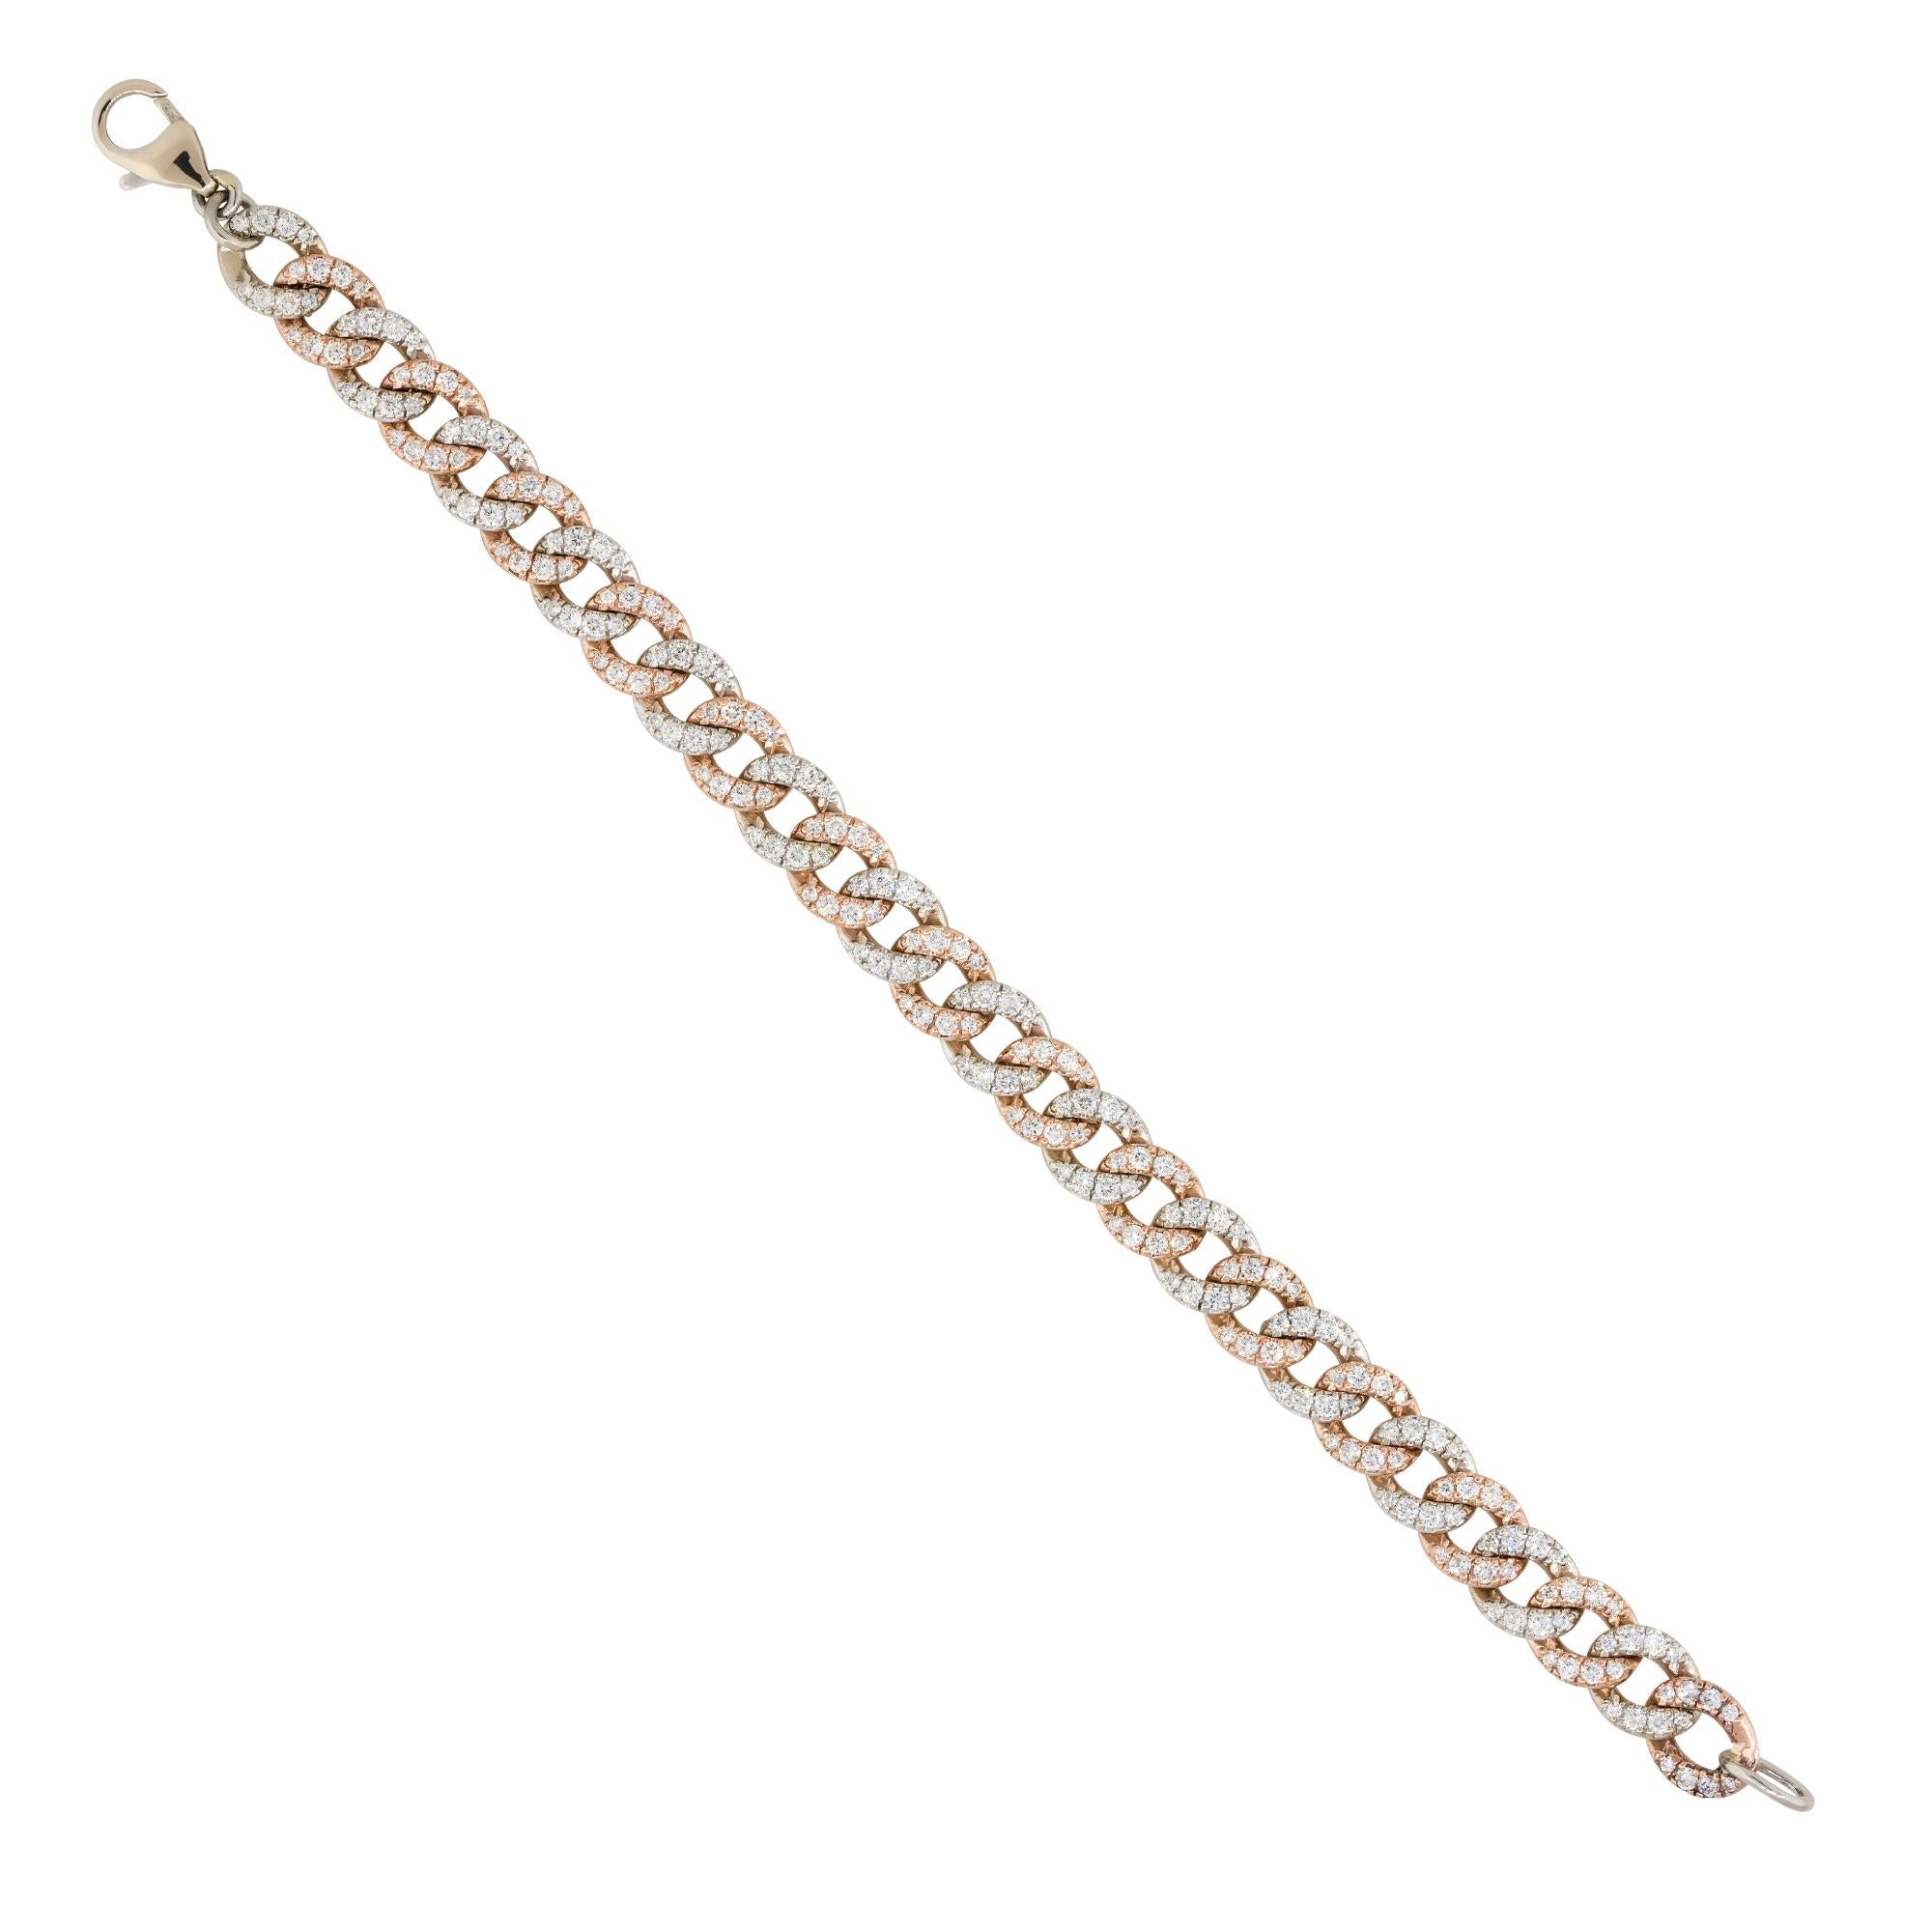 Material: 14k white & rose gold
Diamond Details: Approx. 5.50ctw of round cut Diamonds. Diamonds are G/H in color and VS in clarity
Clasp: Lobster clasp
Measurements: 7